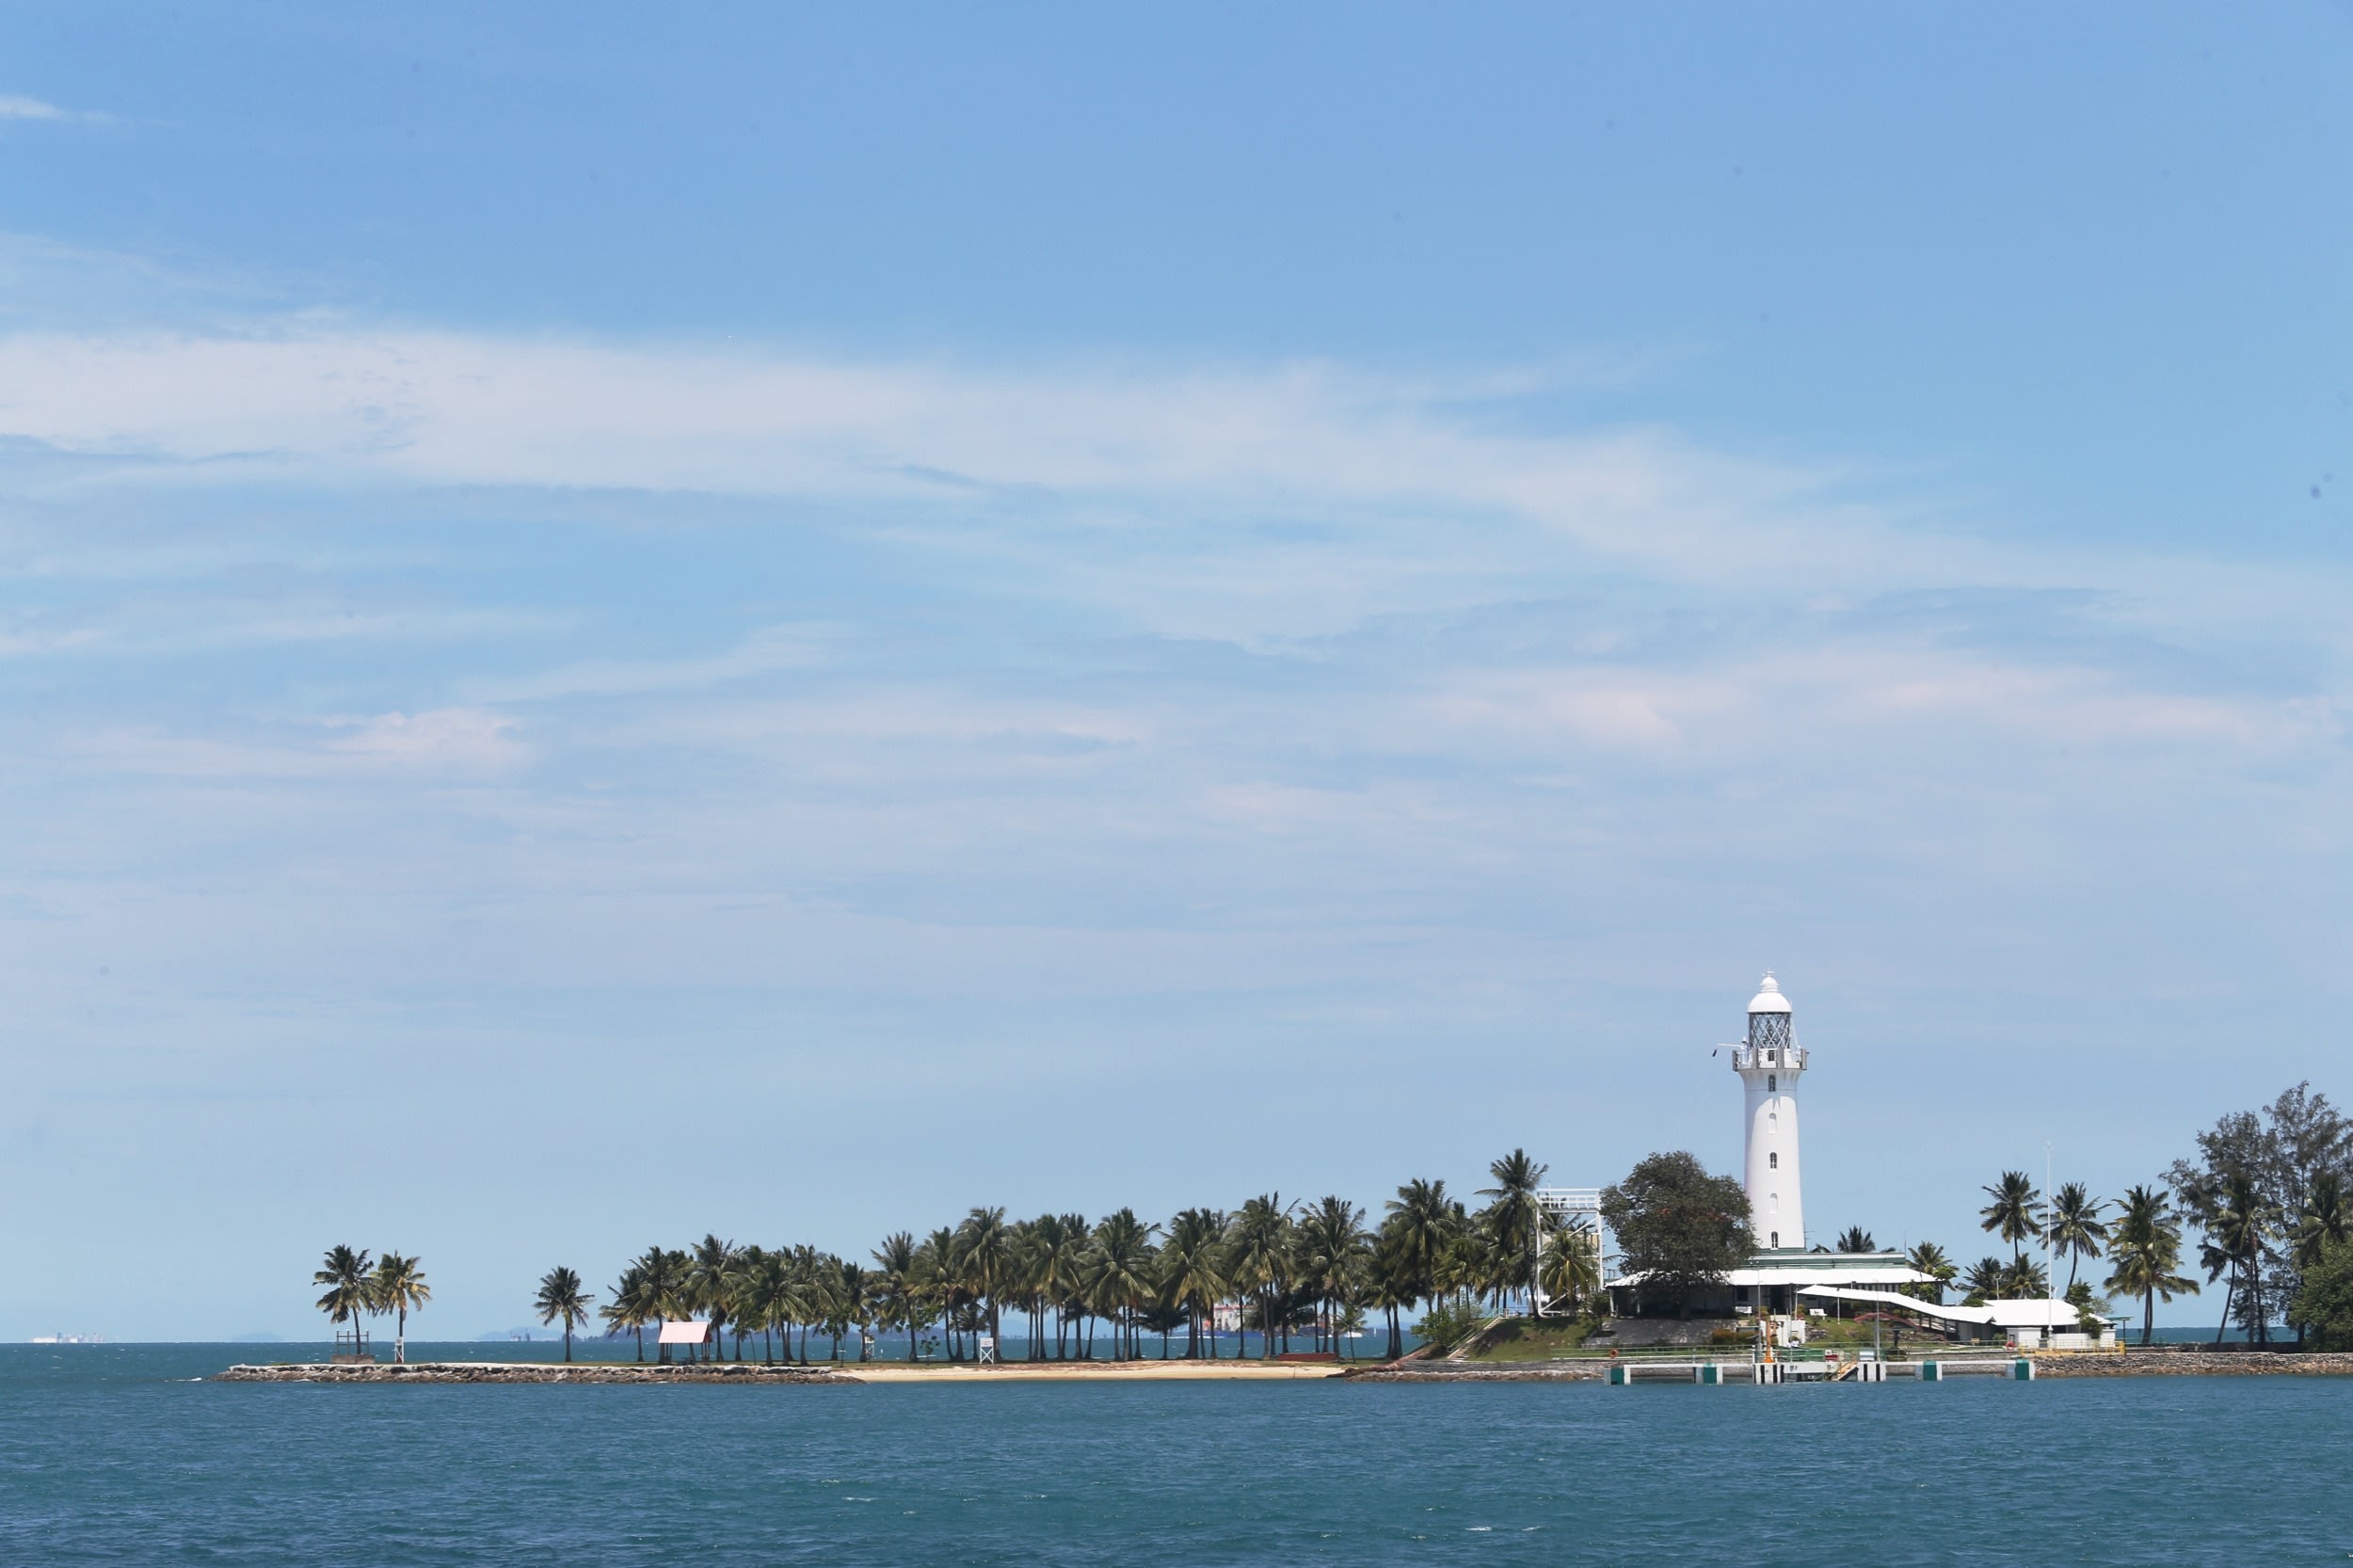 The Raffles Lighthouse at Pulau Satumu. The waters near the island could be used for commercial fish farming if a plan to ensure the Republic's food security comes to fruition.